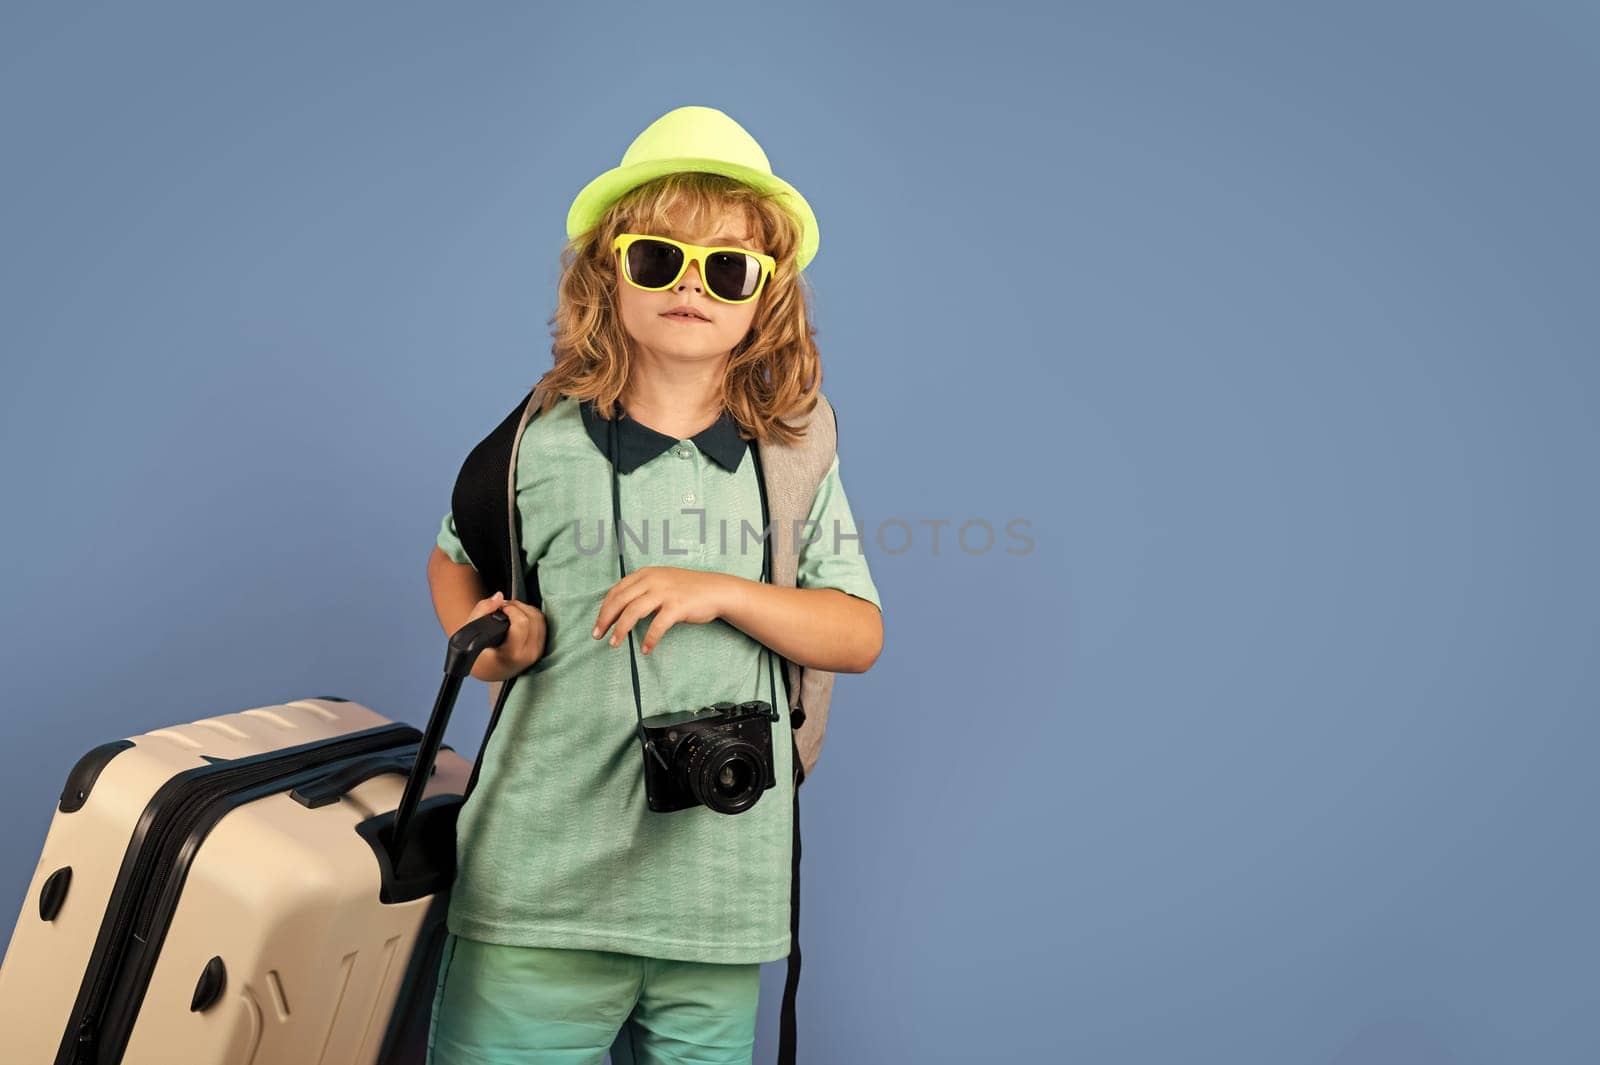 Child traveler with suitcase isolated on studio background. Tourist kid boy. Portrait of child travel with travel bag. Travel, adventure, vacation